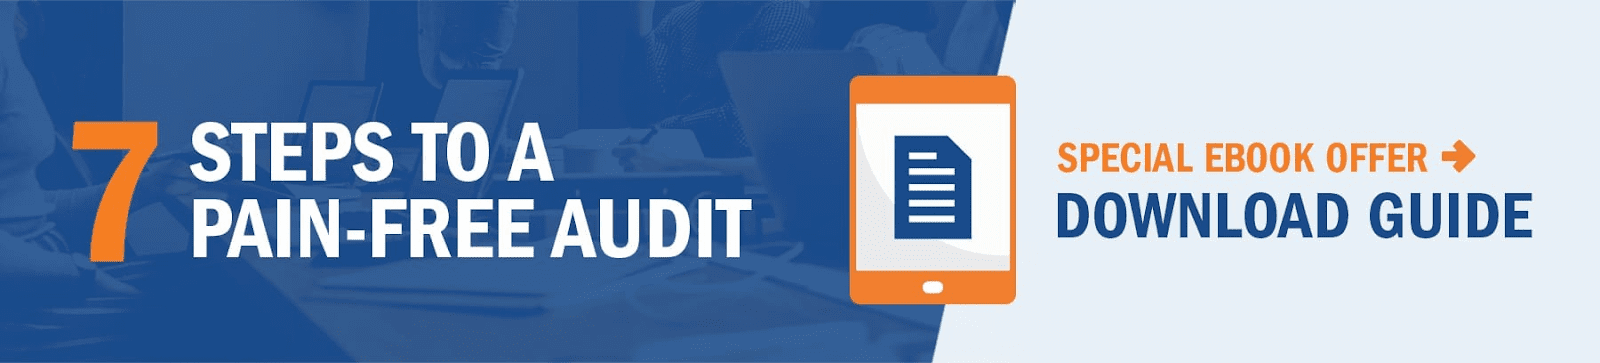 Be Ready for Your First Post-Transition Audit